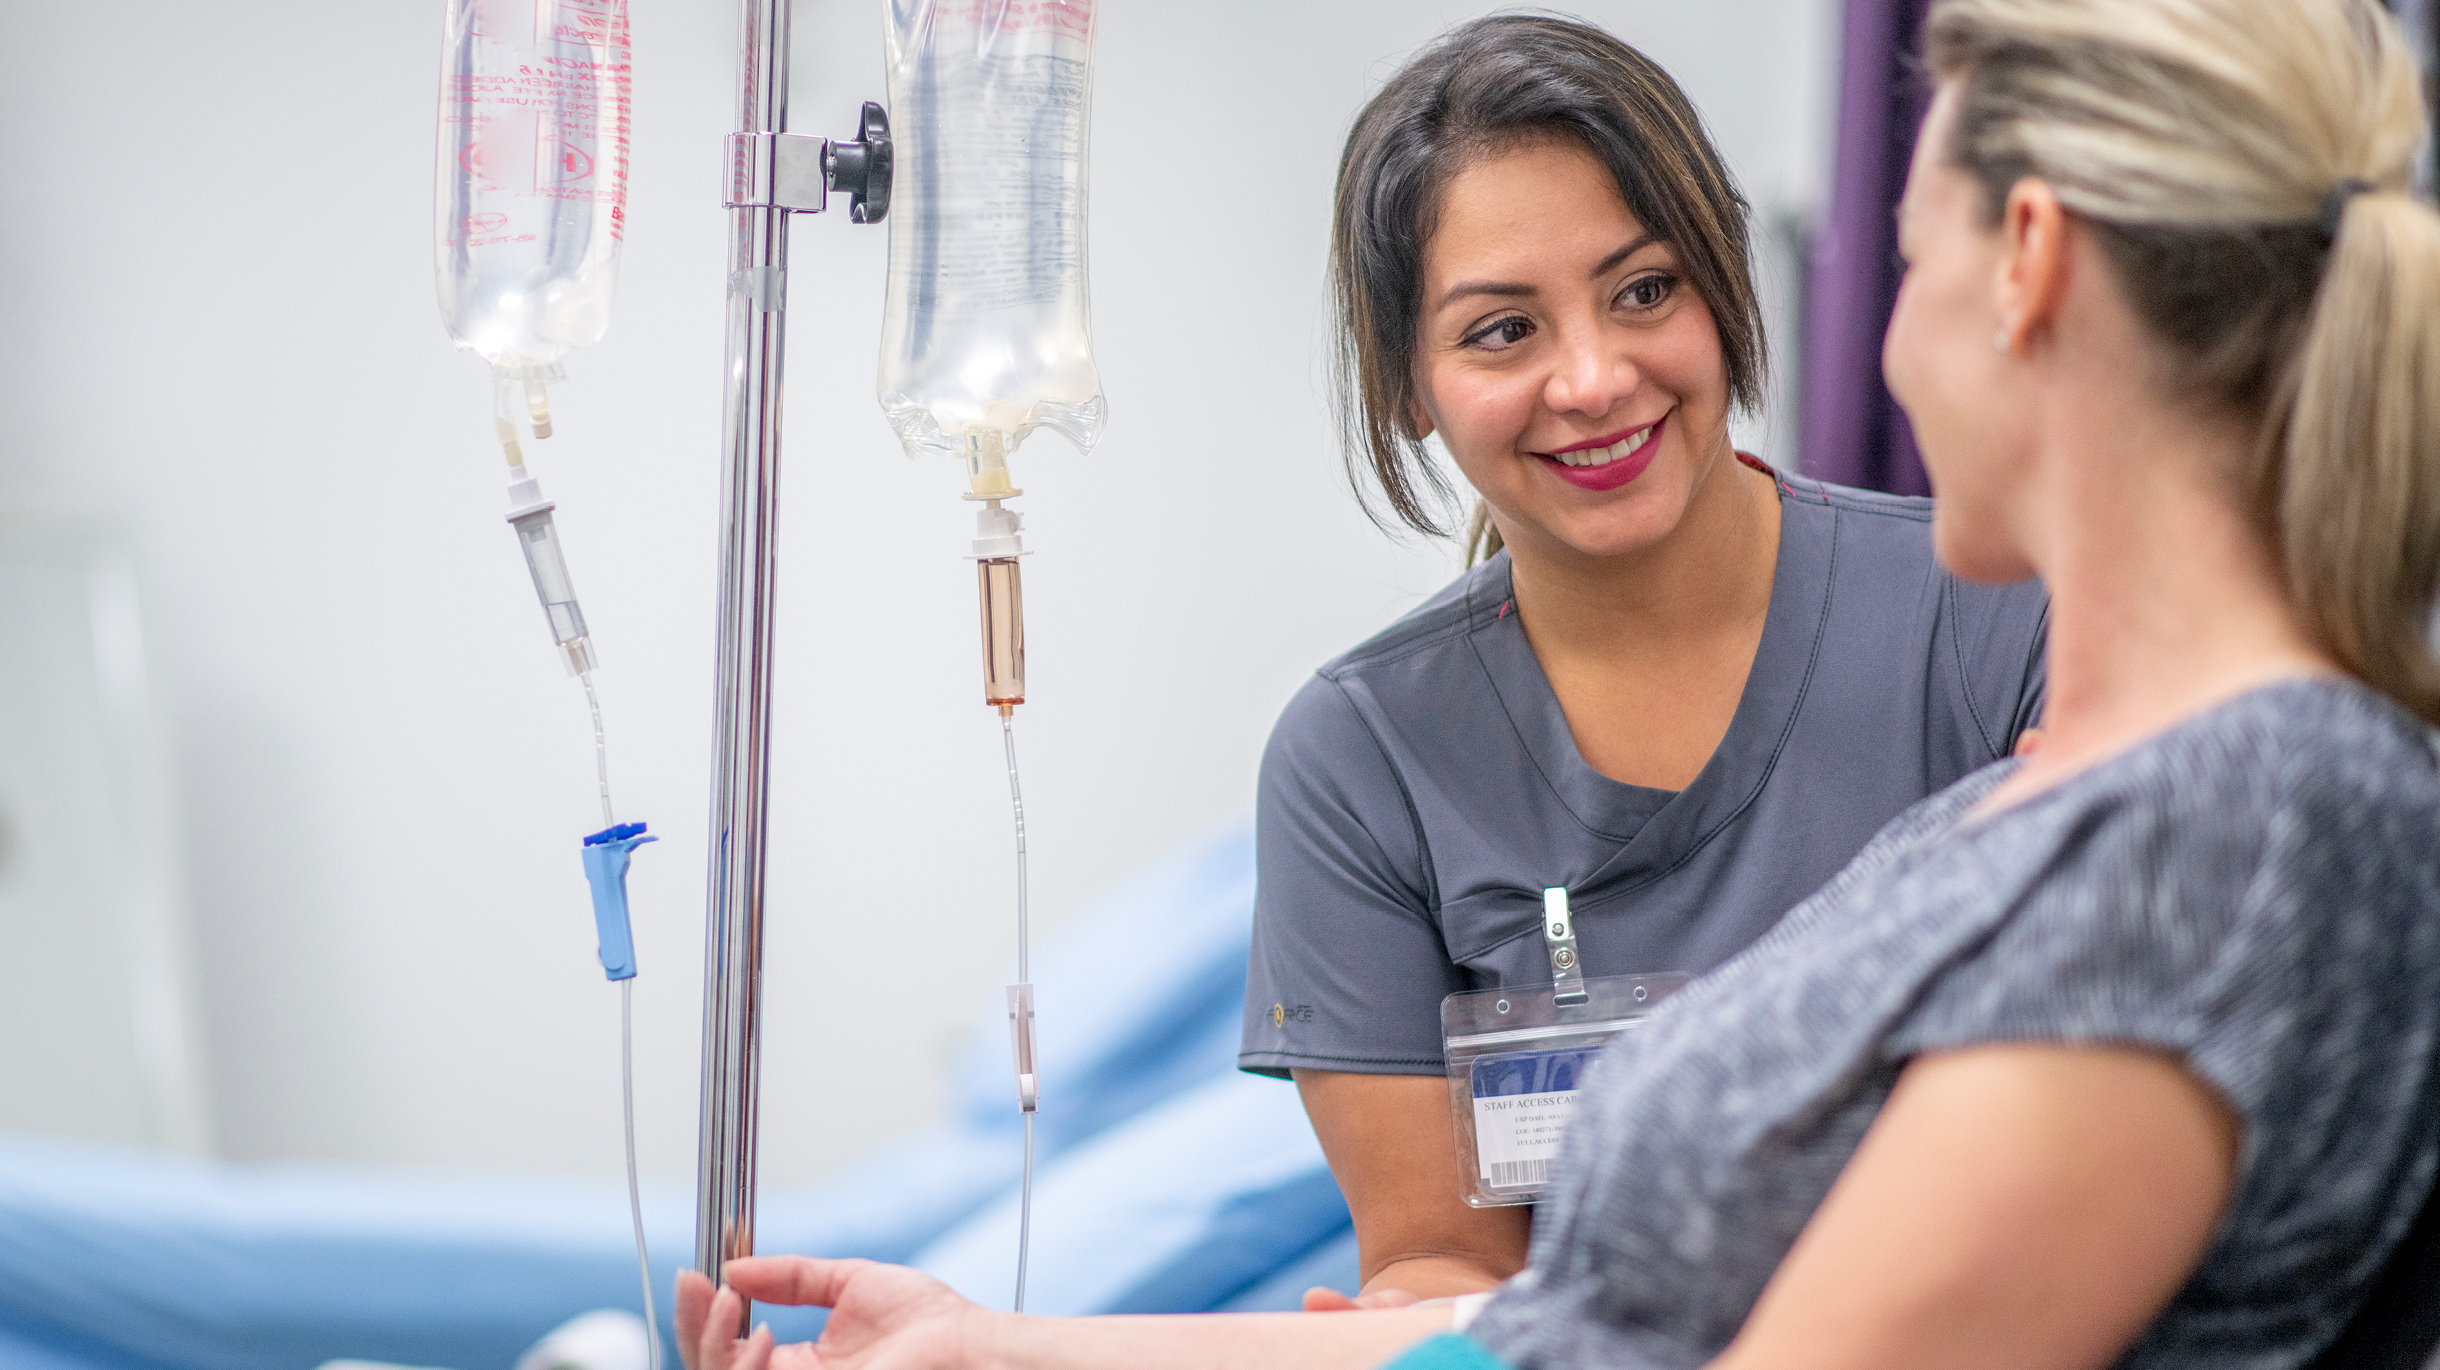 Nurse talking to a patient during infusion